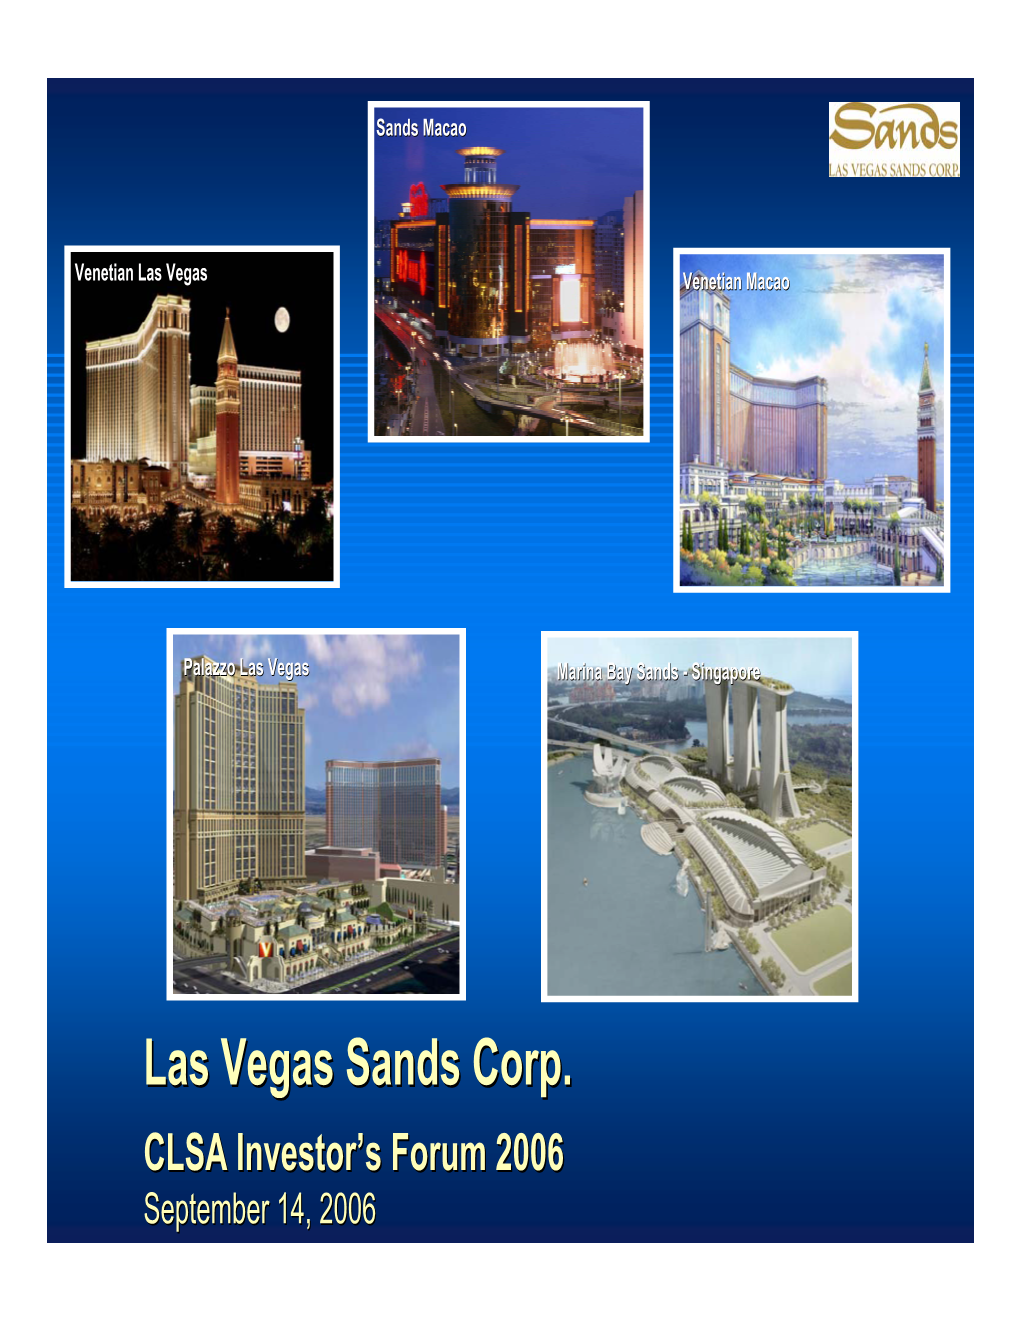 Las Vegas Sands Corp.’S Public Filings with the Securities and Exchange Commission